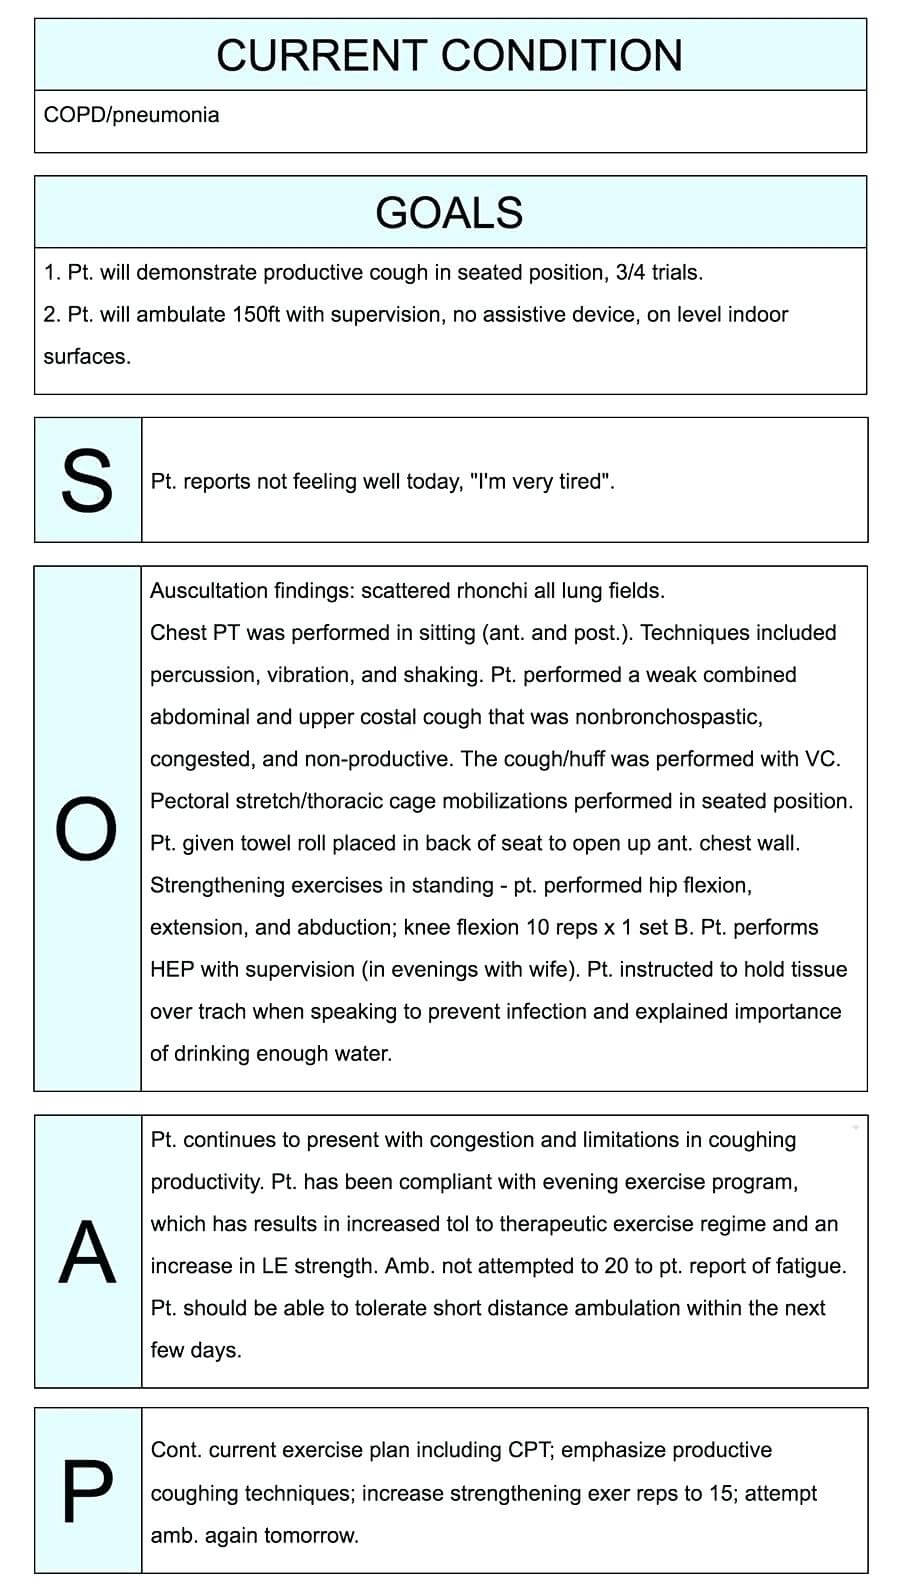 009 Blank Soap Note Template Staggering Ideas Word Nurse Regarding Blank Soap Note Template